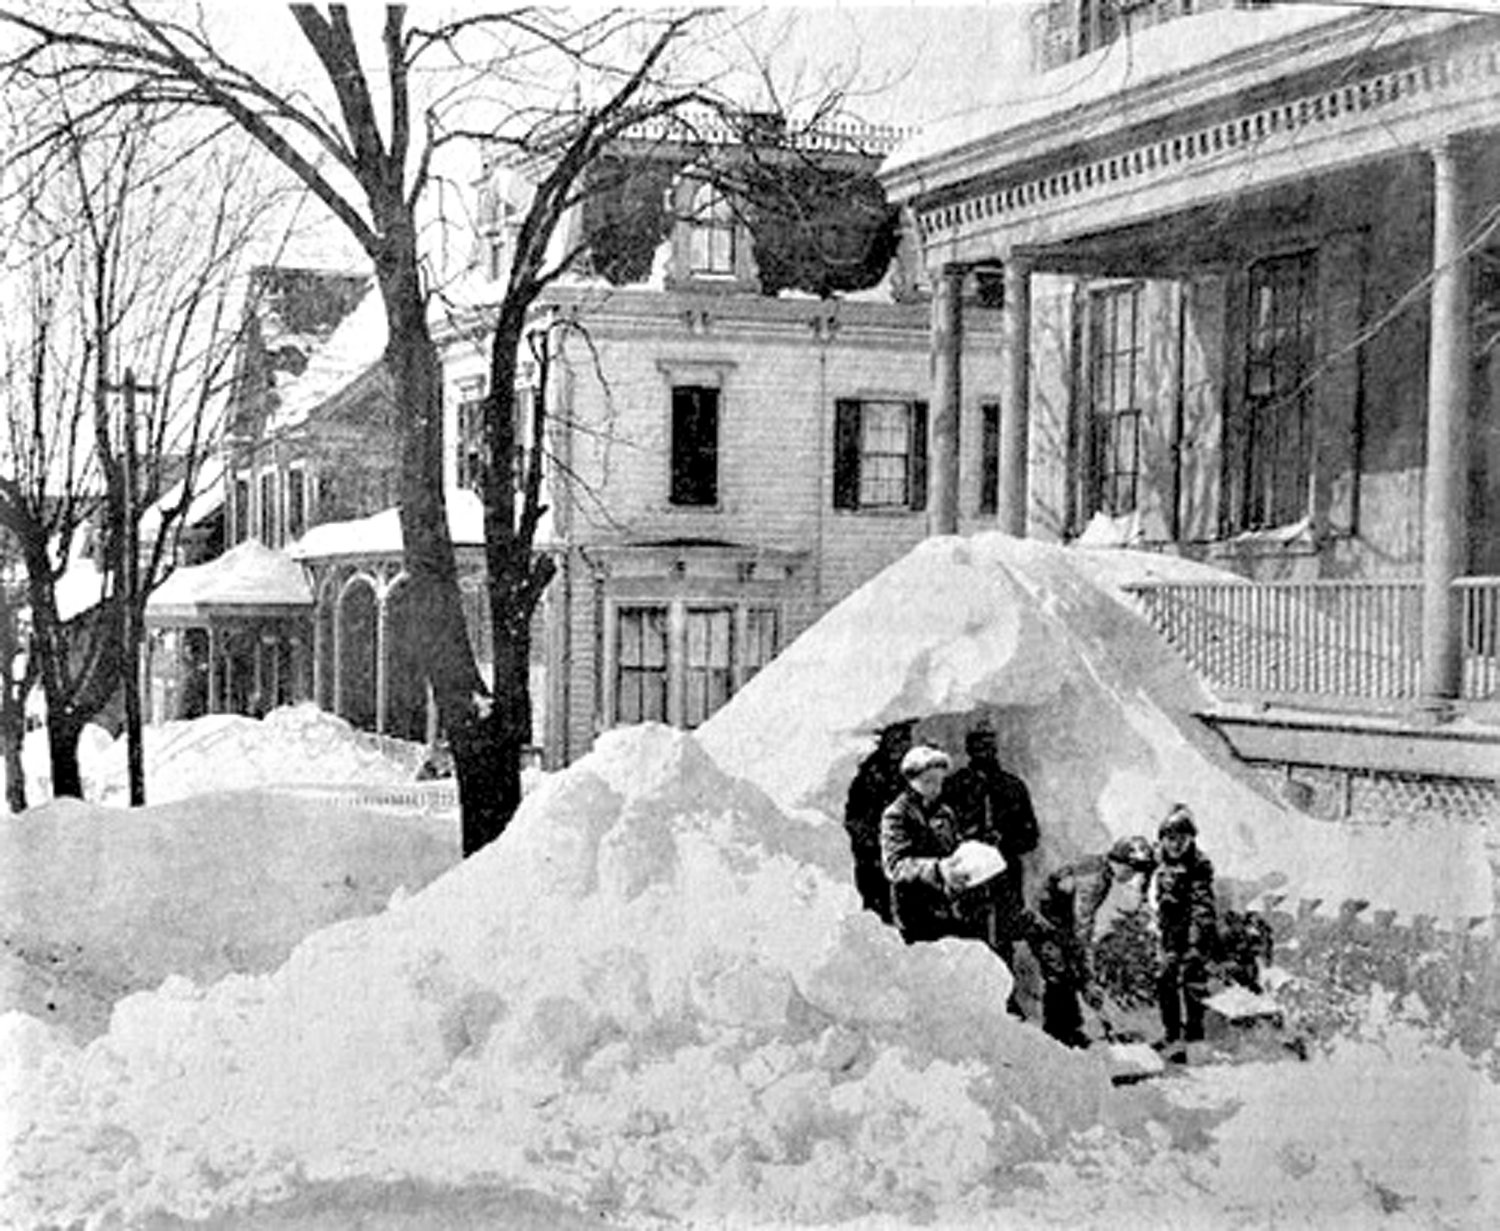 The Blizzard of 1888 dumped several feet of snow on Bucks County on March 11, 1888. Located at the end of the train line, Doylestown was in a particularly isolated condition.